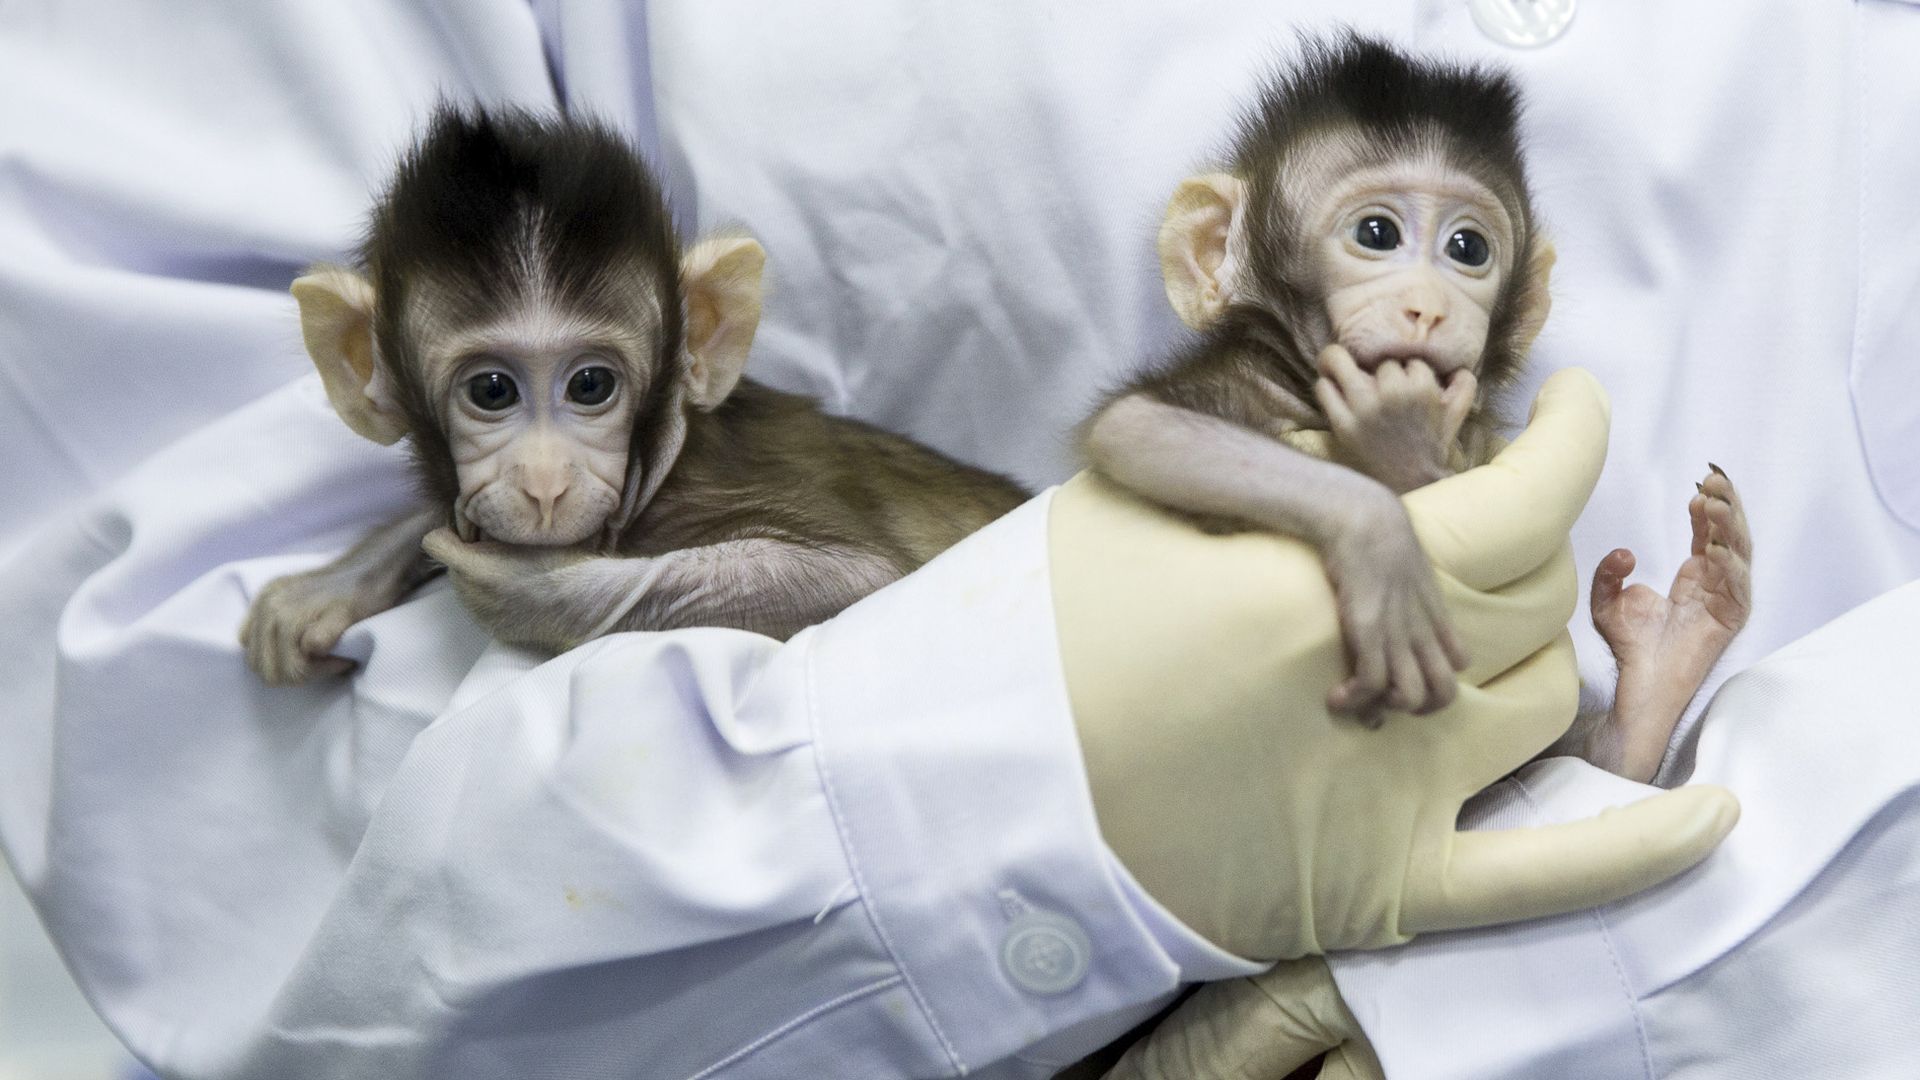 two baby macaque monkeys held by scientist in lab coat and gloves